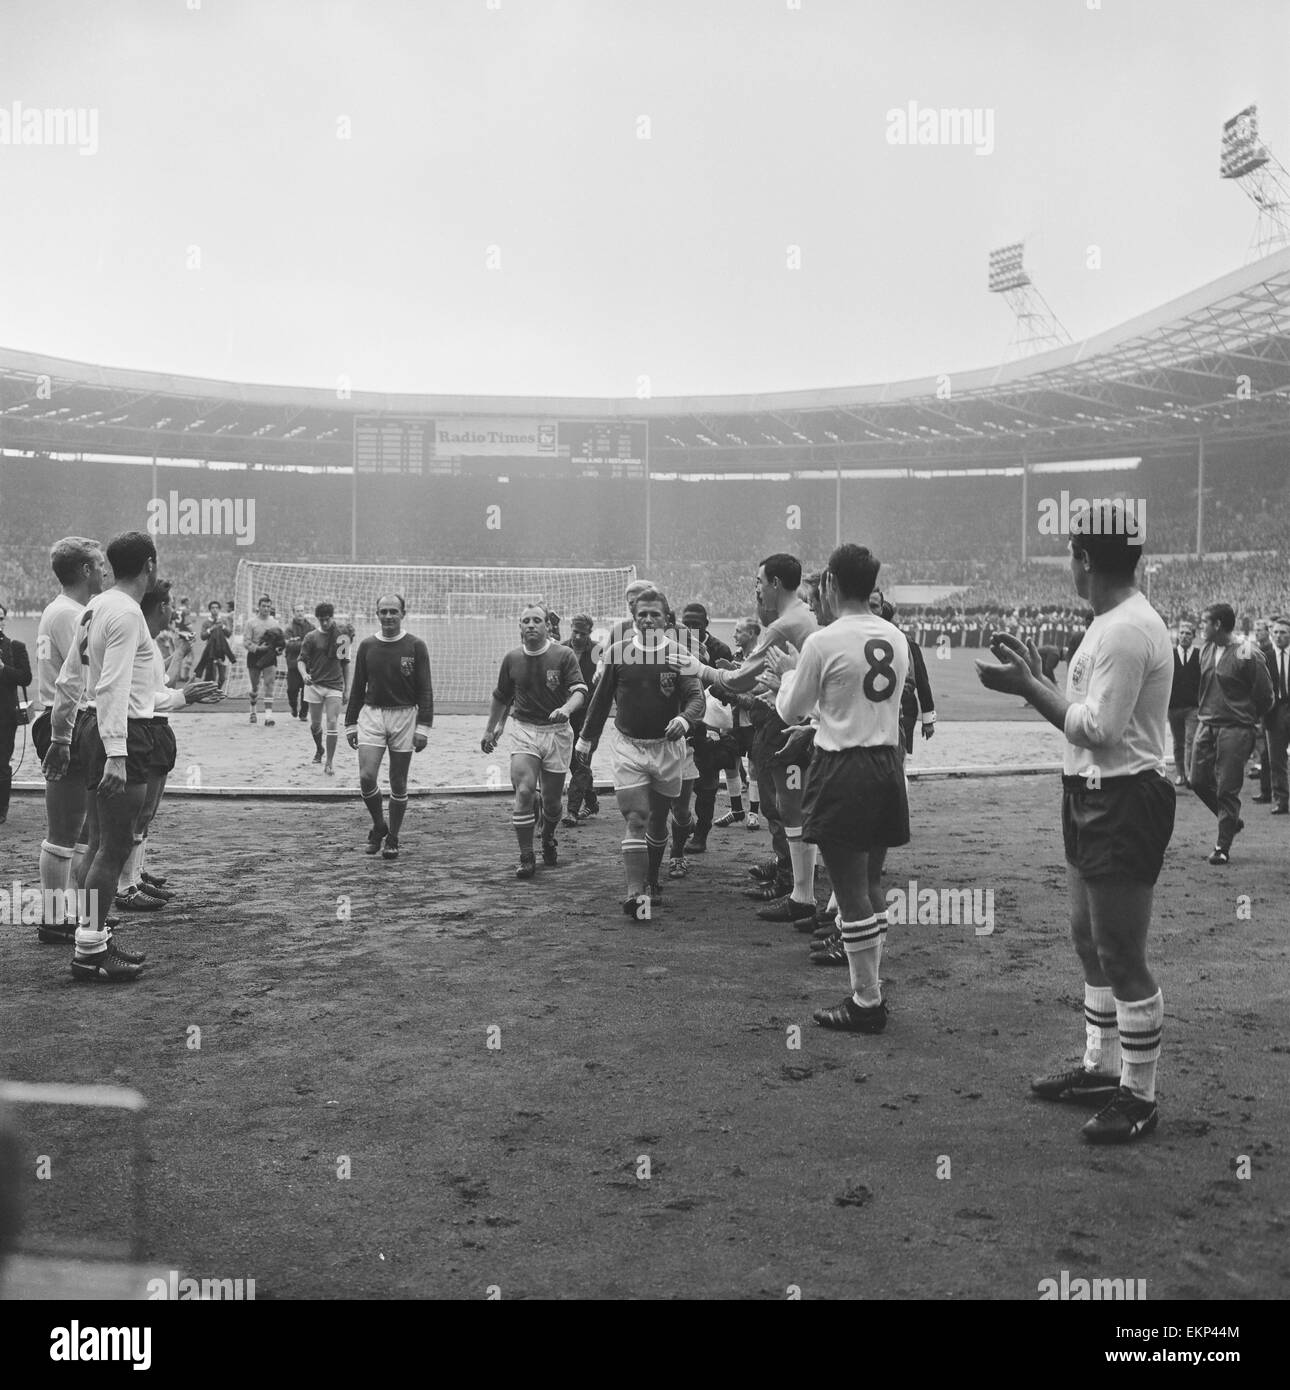 England v Rest of the World football match at Wembley stadium to celebrate 100 years of the Football Association, 23rd Octpber 1963. Ferenc Puskas leads the All Star team off the pitch tp applause from England Players including Bobby Moore, Jimmy Greaves Stock Photo